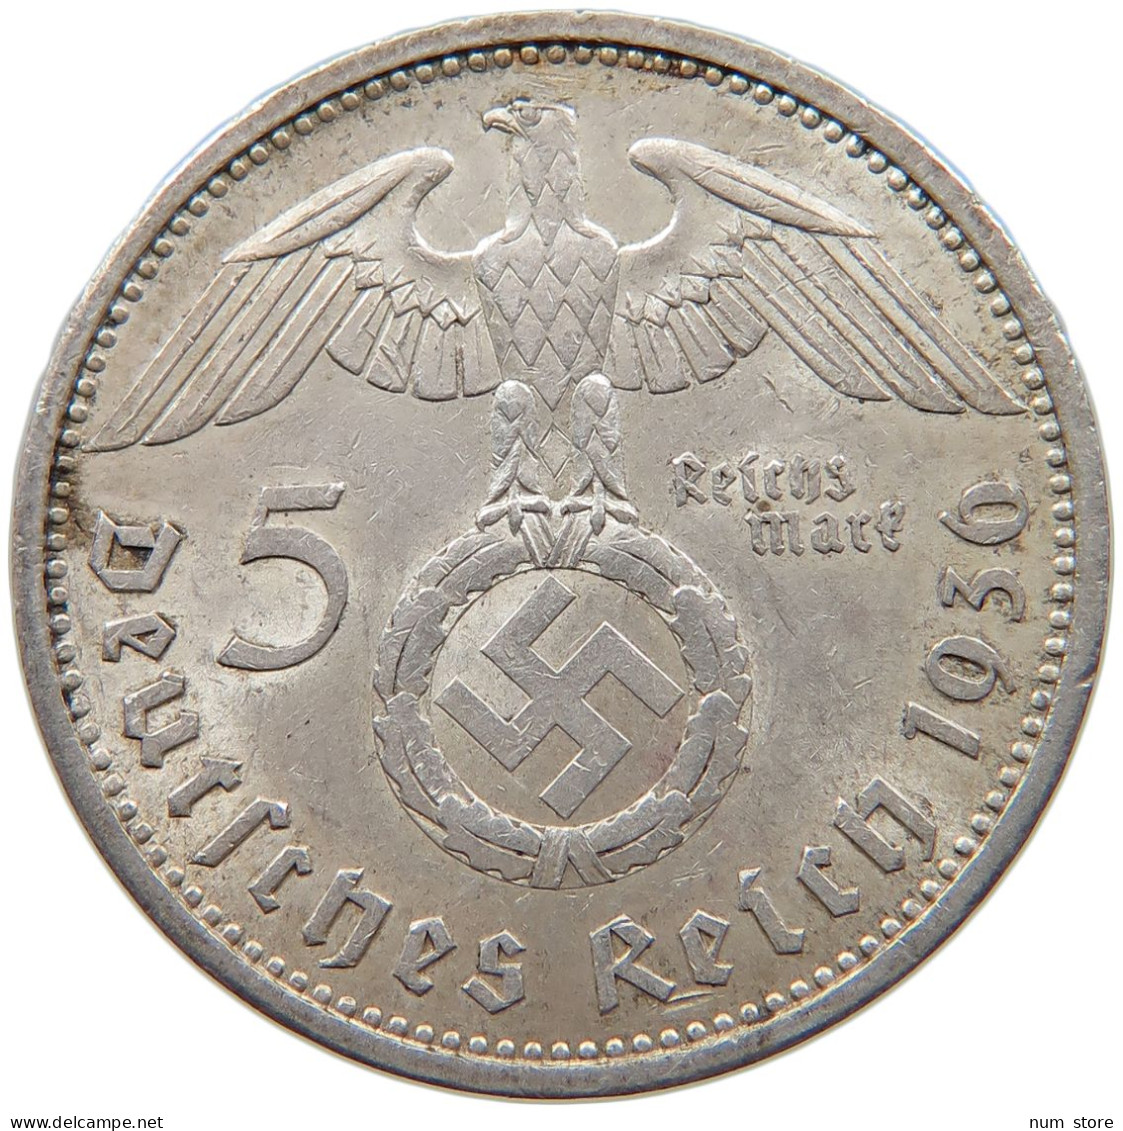 GERMANY 5 MARK 1936 A #s094 0067 - 5 Reichsmark